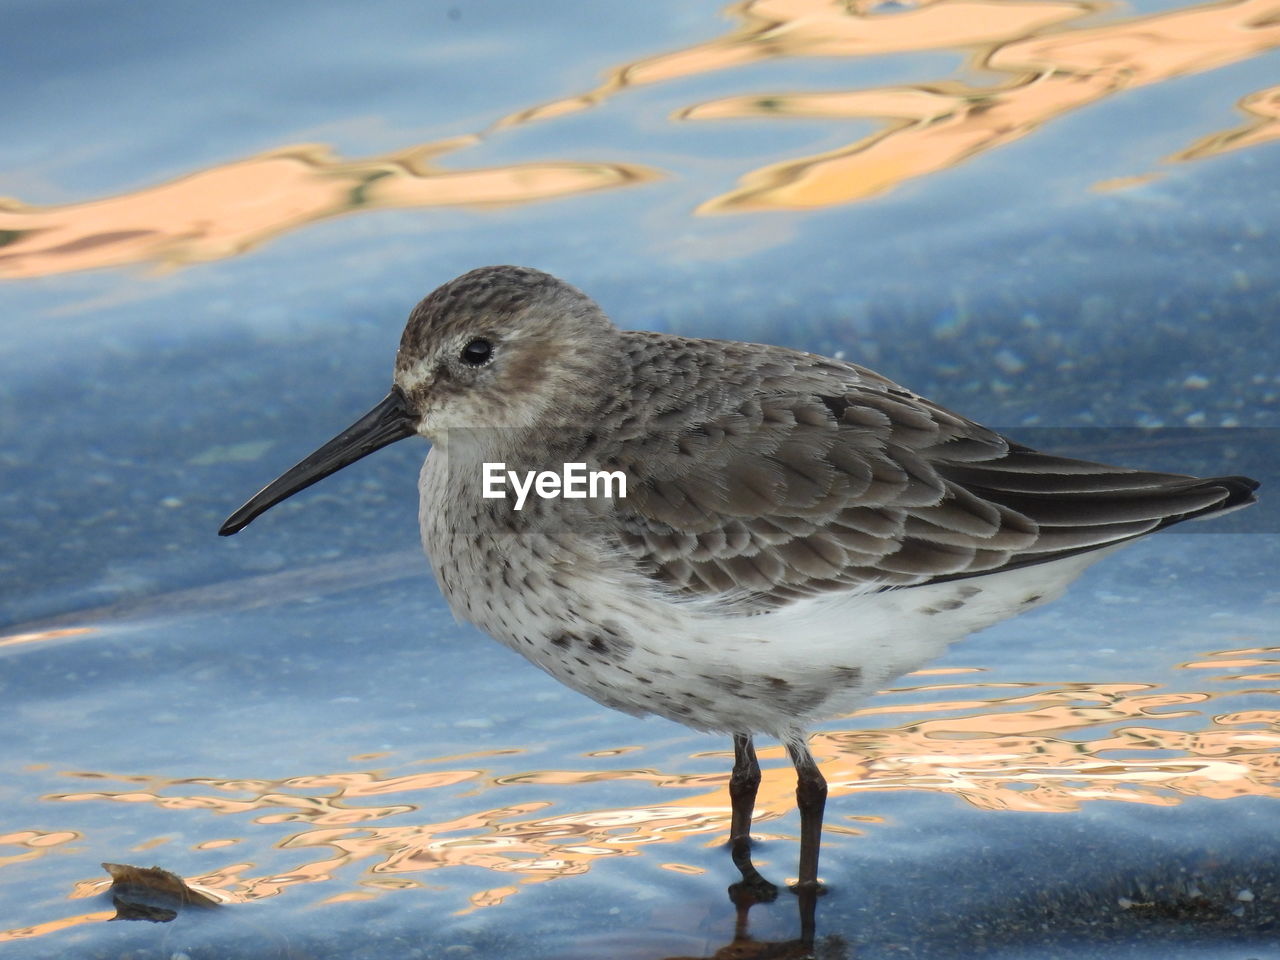 animal themes, bird, animal, animal wildlife, sandpiper, wildlife, one animal, calidrid, redshank, nature, red-backed sandpiper, water, beak, winter, no people, gull, full length, day, seagull, outdoors, beauty in nature, cold temperature, snow, focus on foreground, side view